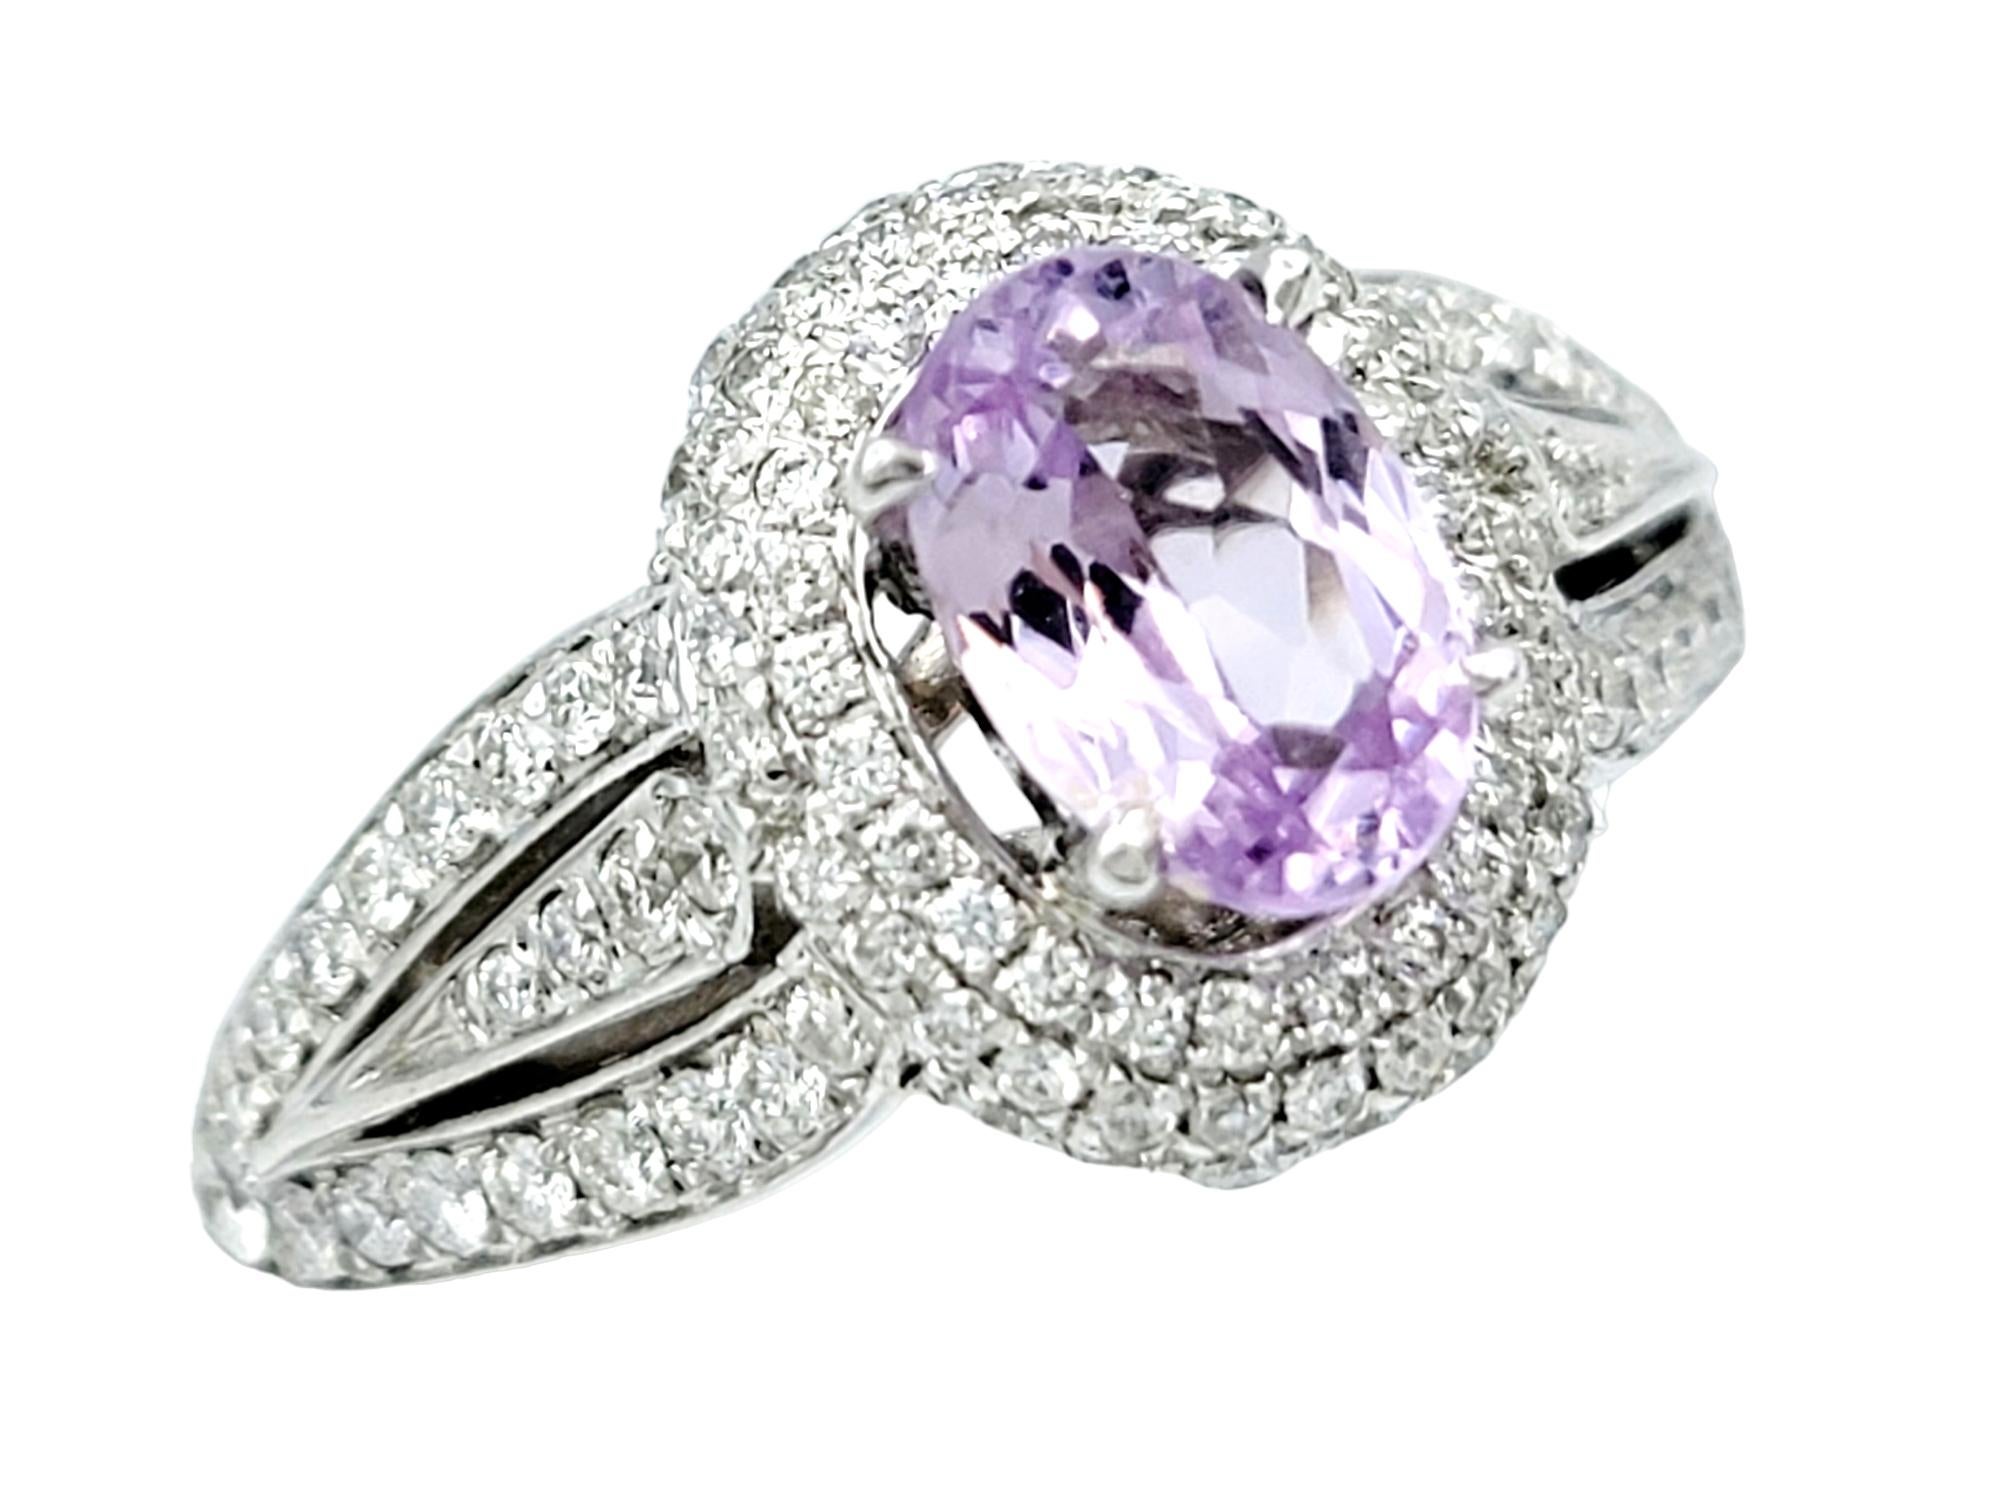 Ring Size: 7.25

This captivating cocktail ring is the epitome of elegance, a mesmerizing creation set in the refined embrace of 14 karat white gold. The centerpiece of this luxurious adornment is a luscious lavender purple spinel, expertly cut into